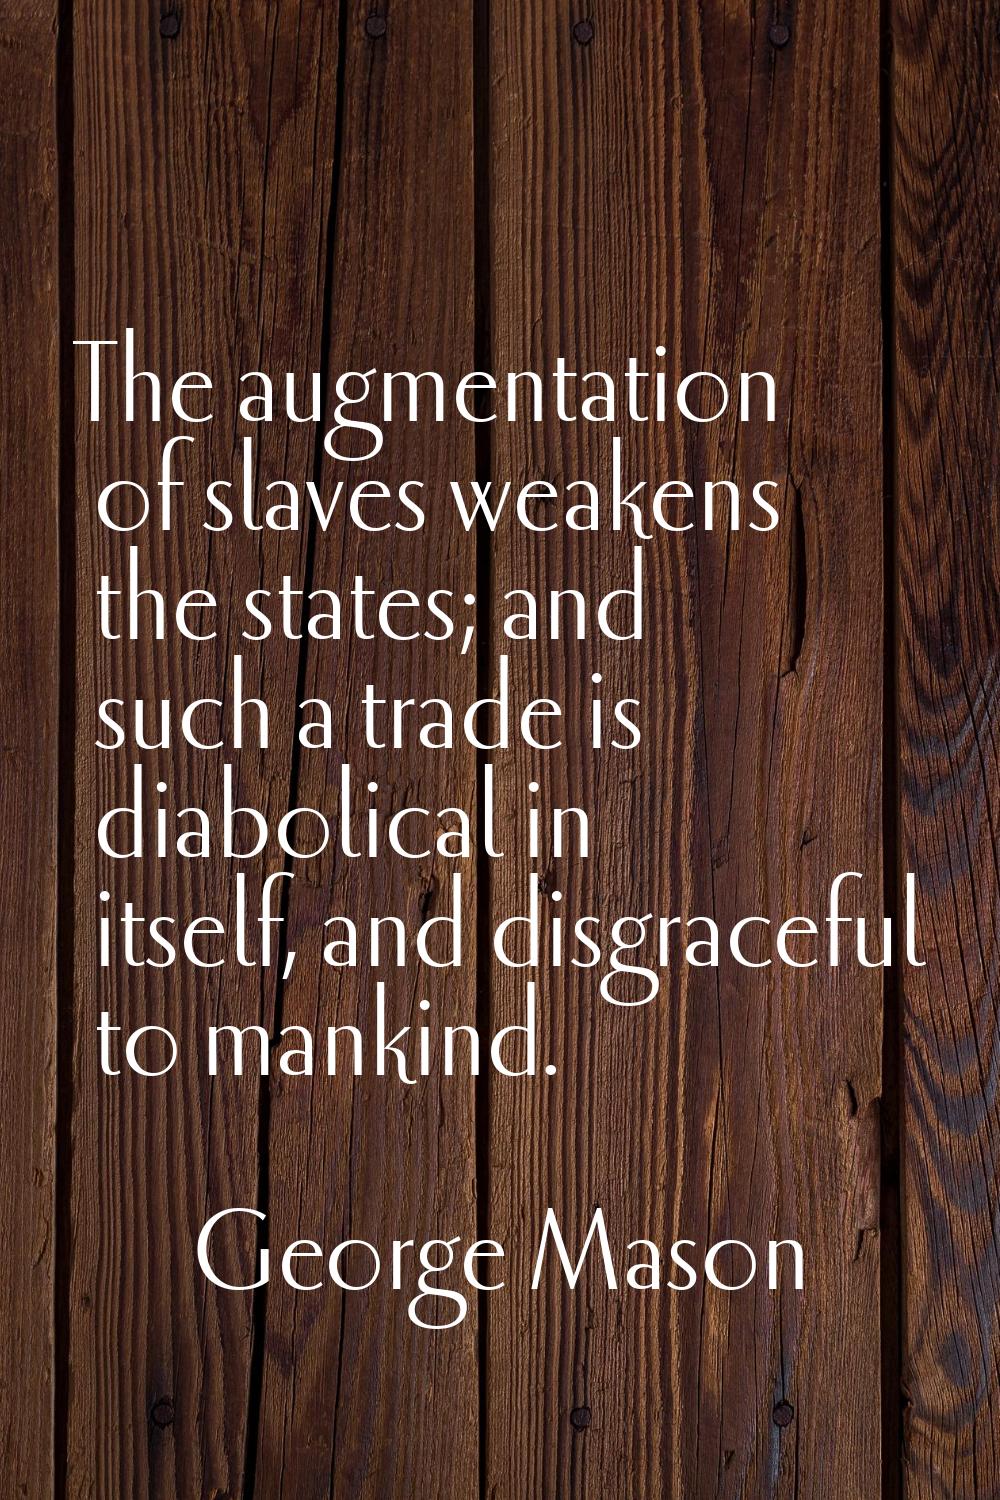 The augmentation of slaves weakens the states; and such a trade is diabolical in itself, and disgra